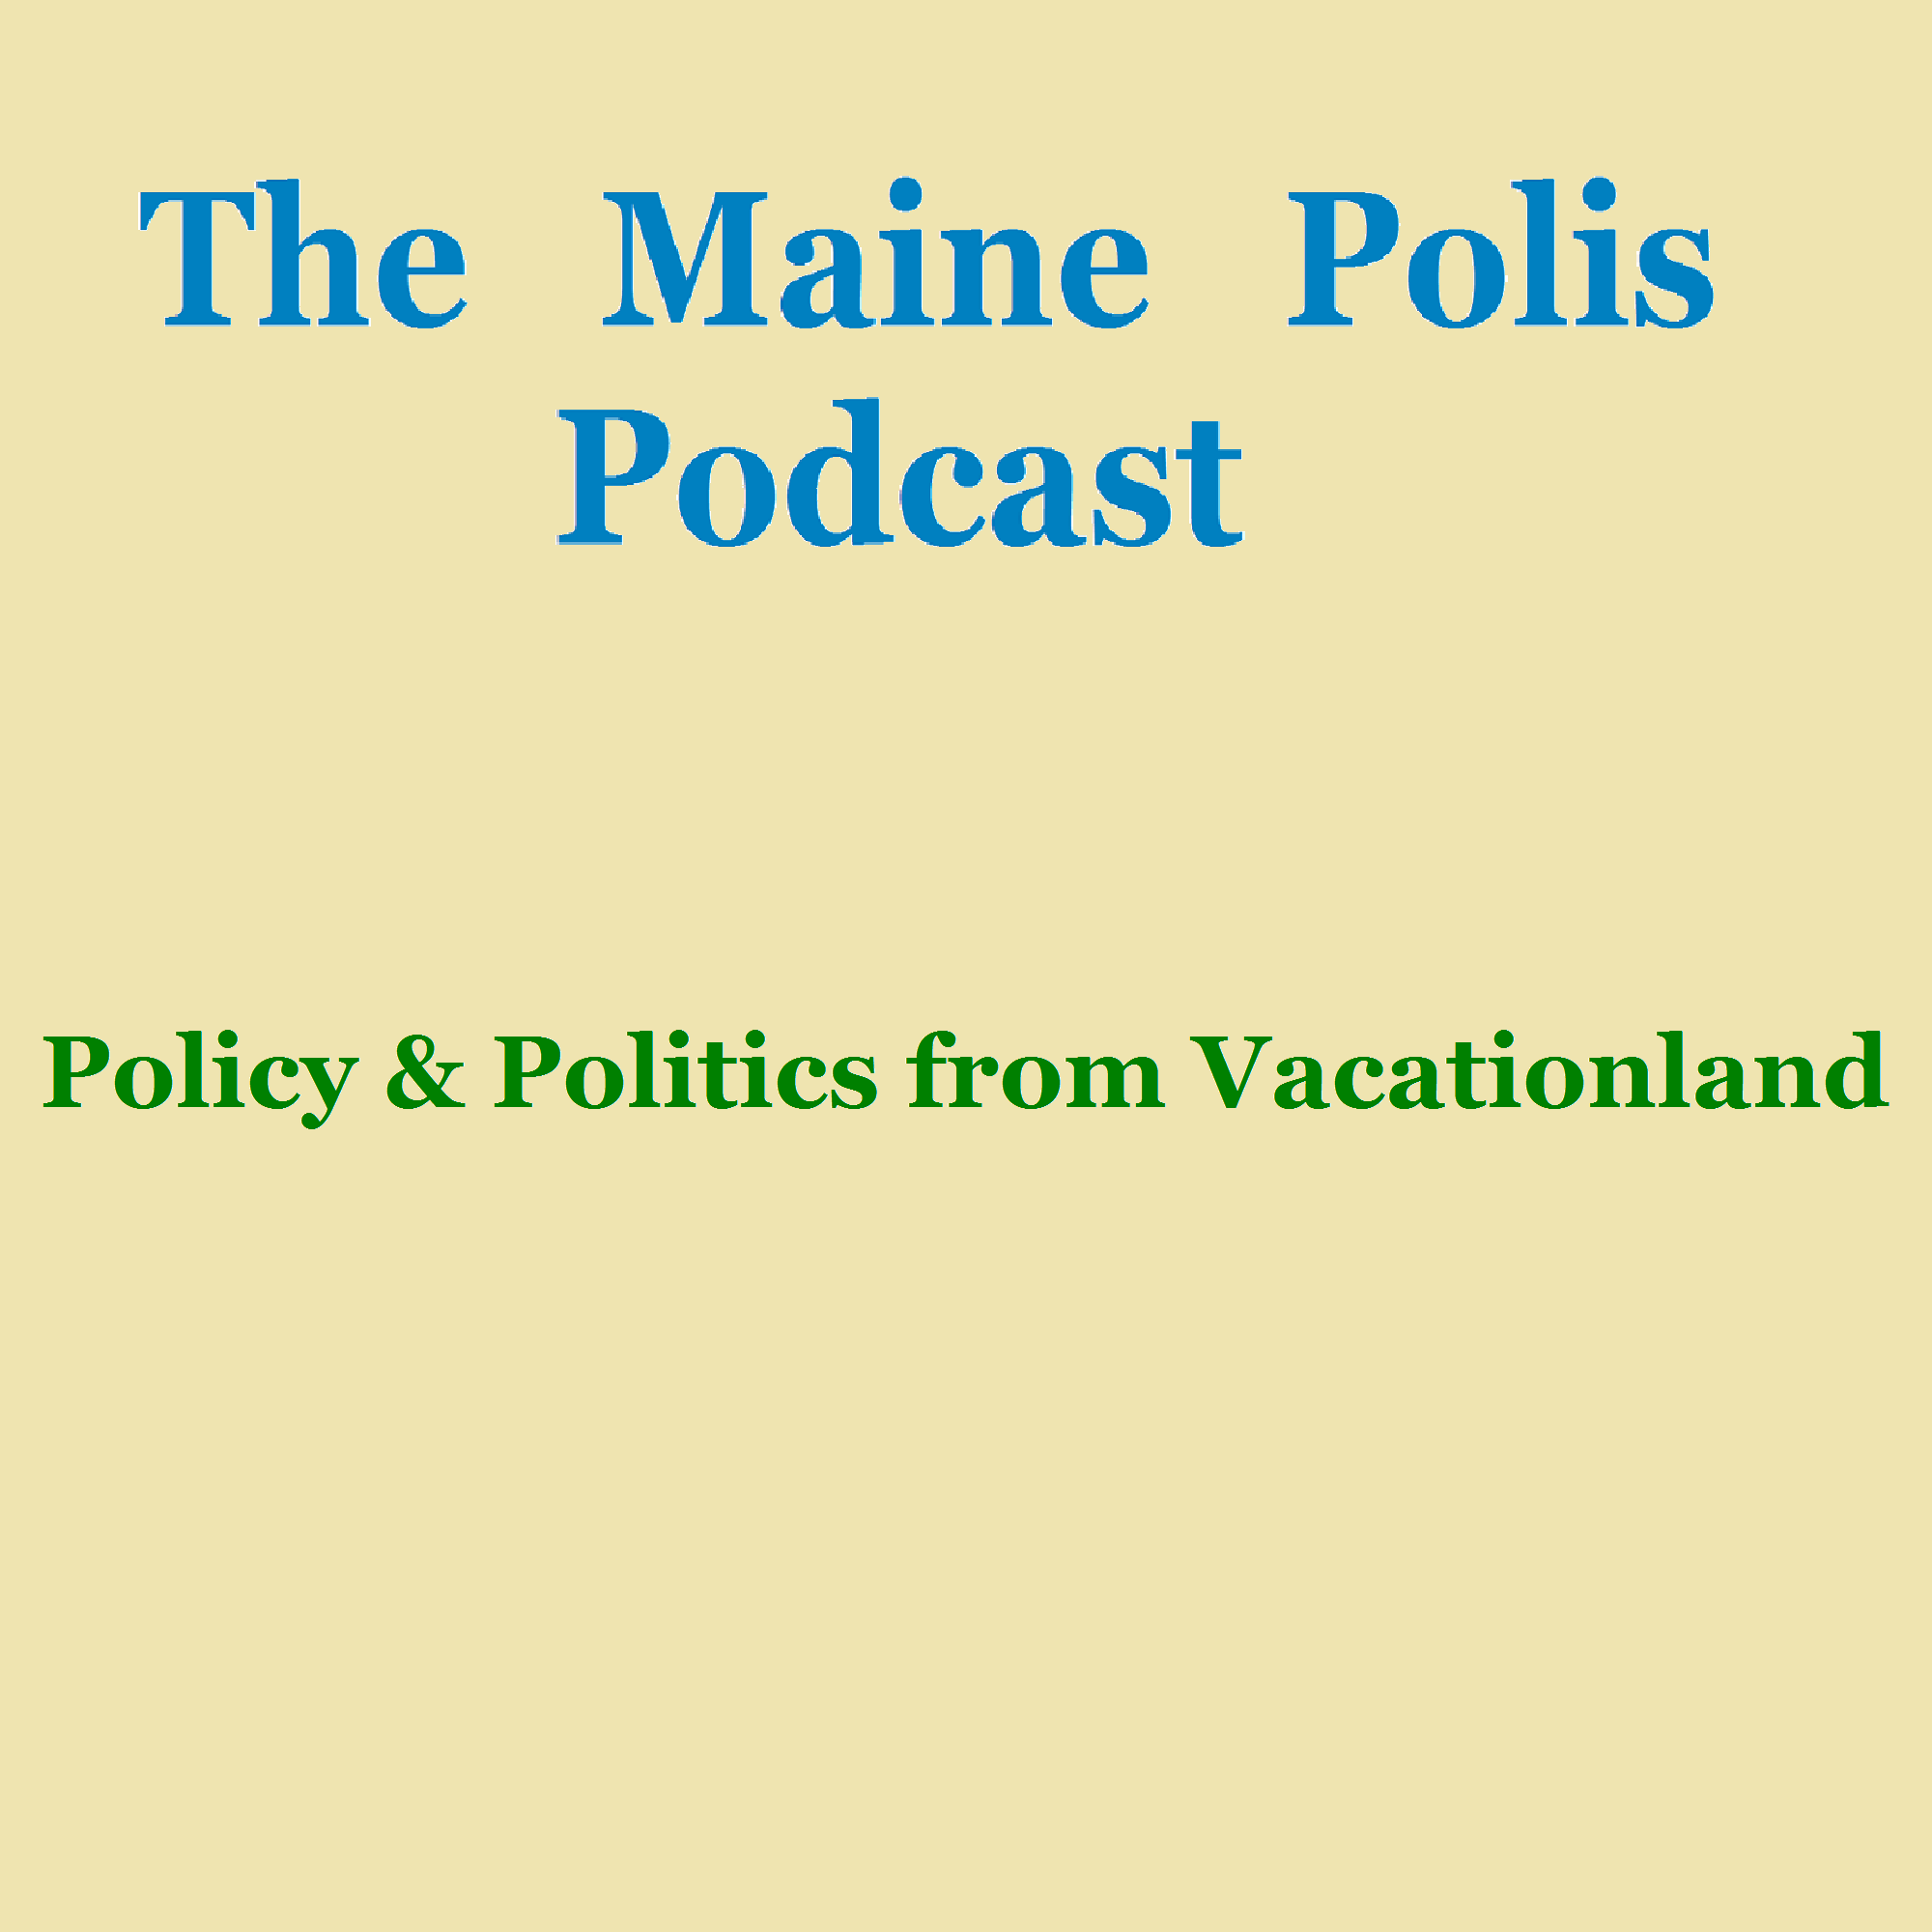 TMP Podcast #8 - New England Clean Energy Connect Project Part III:  HydroQuebec & The Environmental Cost of Clean Energy